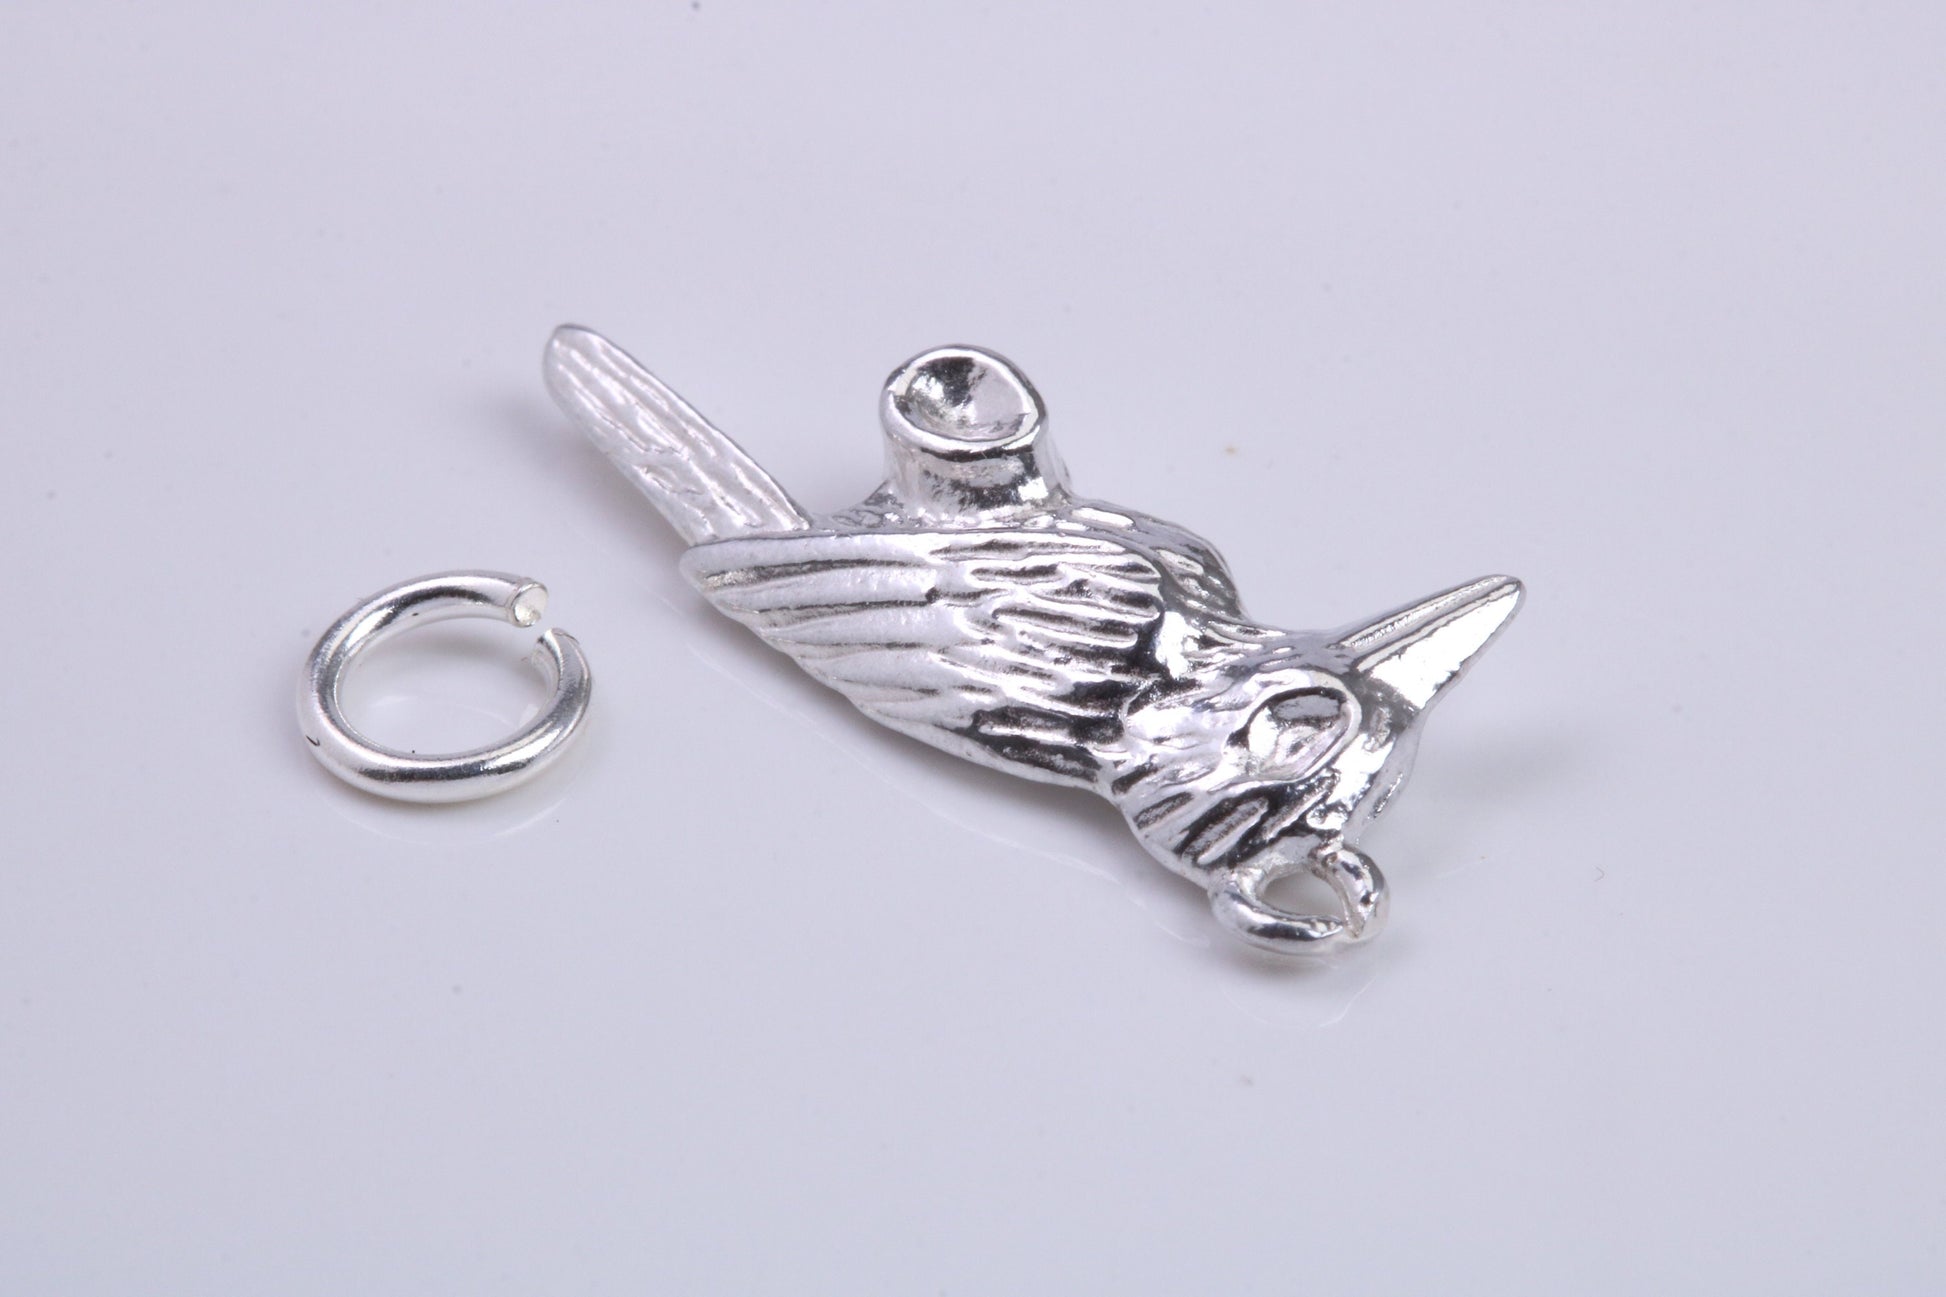 Raven Charm, Traditional Charm, Made from Solid 925 Grade Sterling Silver, Complete with Attachment Link